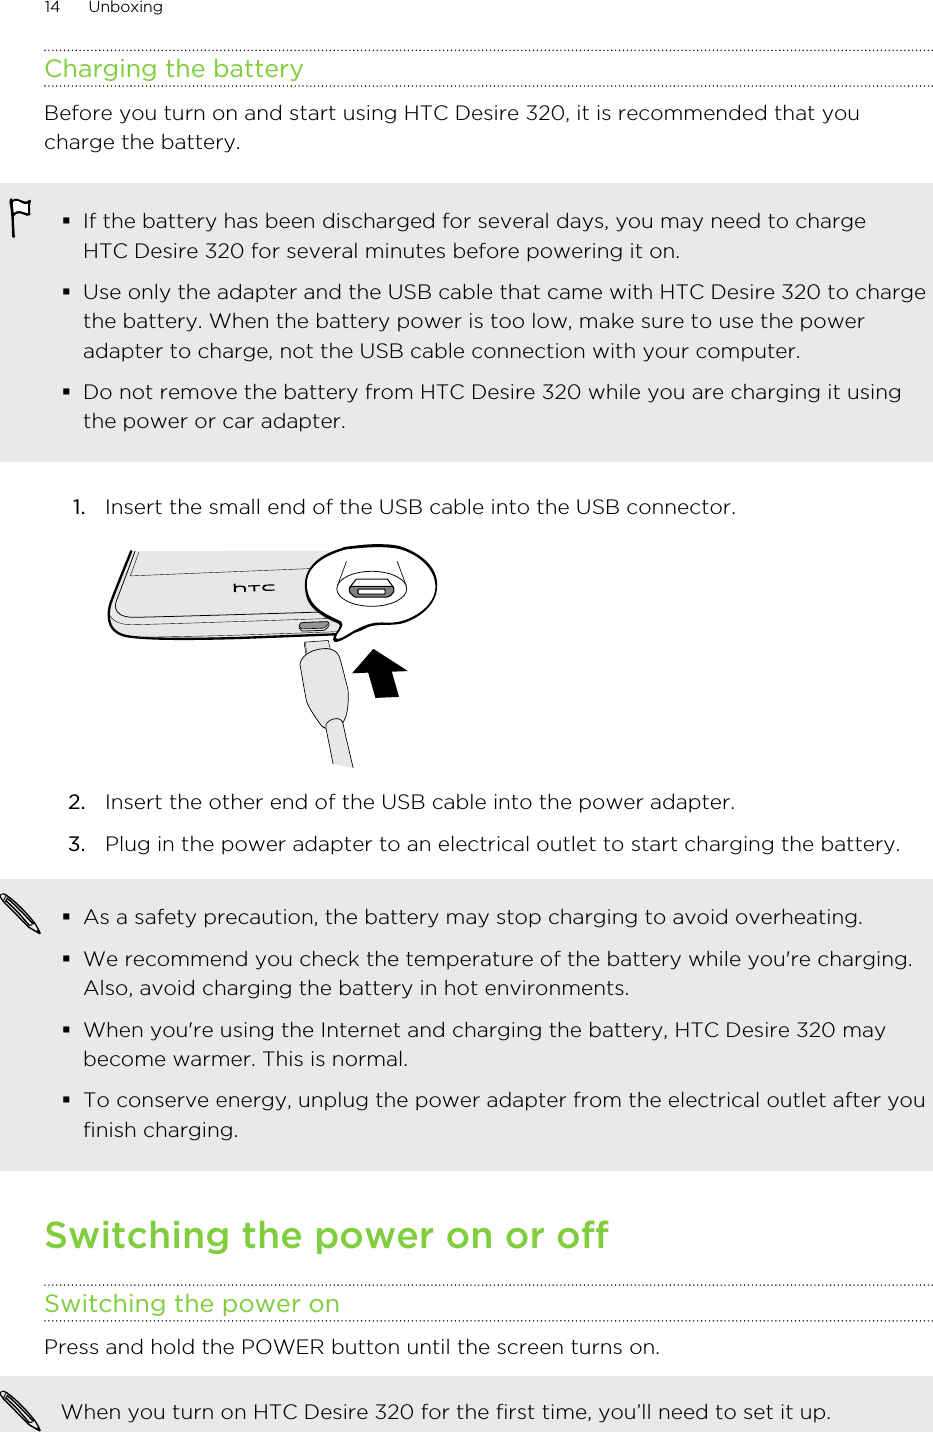 Charging the batteryBefore you turn on and start using HTC Desire 320, it is recommended that youcharge the battery.§If the battery has been discharged for several days, you may need to chargeHTC Desire 320 for several minutes before powering it on.§Use only the adapter and the USB cable that came with HTC Desire 320 to chargethe battery. When the battery power is too low, make sure to use the poweradapter to charge, not the USB cable connection with your computer.§Do not remove the battery from HTC Desire 320 while you are charging it usingthe power or car adapter.1. Insert the small end of the USB cable into the USB connector. 2. Insert the other end of the USB cable into the power adapter.3. Plug in the power adapter to an electrical outlet to start charging the battery.§As a safety precaution, the battery may stop charging to avoid overheating.§We recommend you check the temperature of the battery while you&apos;re charging.Also, avoid charging the battery in hot environments.§When you&apos;re using the Internet and charging the battery, HTC Desire 320 maybecome warmer. This is normal.§To conserve energy, unplug the power adapter from the electrical outlet after youfinish charging.Switching the power on or offSwitching the power onPress and hold the POWER button until the screen turns on. When you turn on HTC Desire 320 for the first time, you’ll need to set it up.14 Unboxing